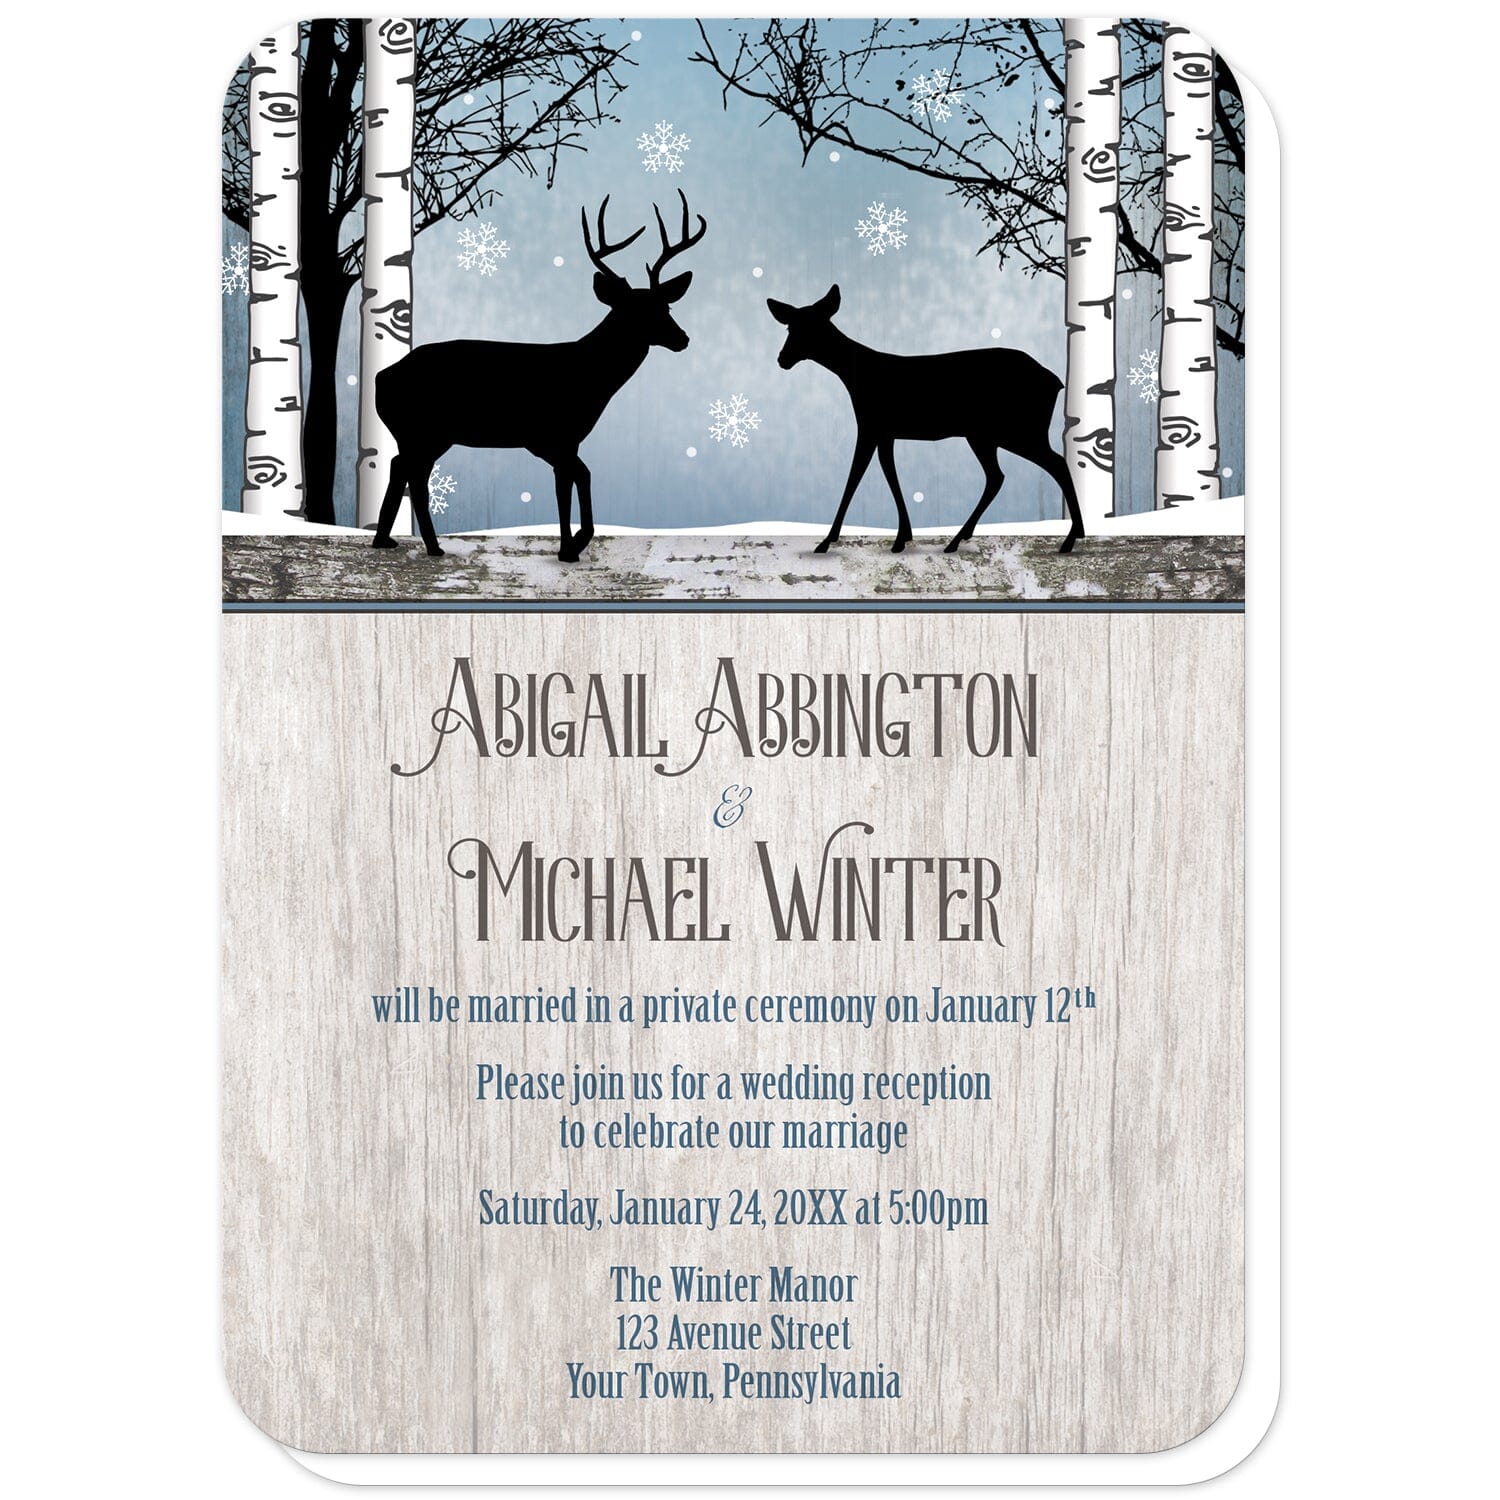 Rustic Blue Winter Deer Reception Only Invitations (with rounded corners) at Artistically Invited. Rustic blue winter deer reception only invitations with two silhouettes of deer surrounded by white birch trees over a snowy blue background with snowflakes. One silhouette is of a buck deer with antlers while the other is a gentle doe, meeting in the middle. Your personalized post-wedding reception details are custom printed in blue and brown over a light country wood background.